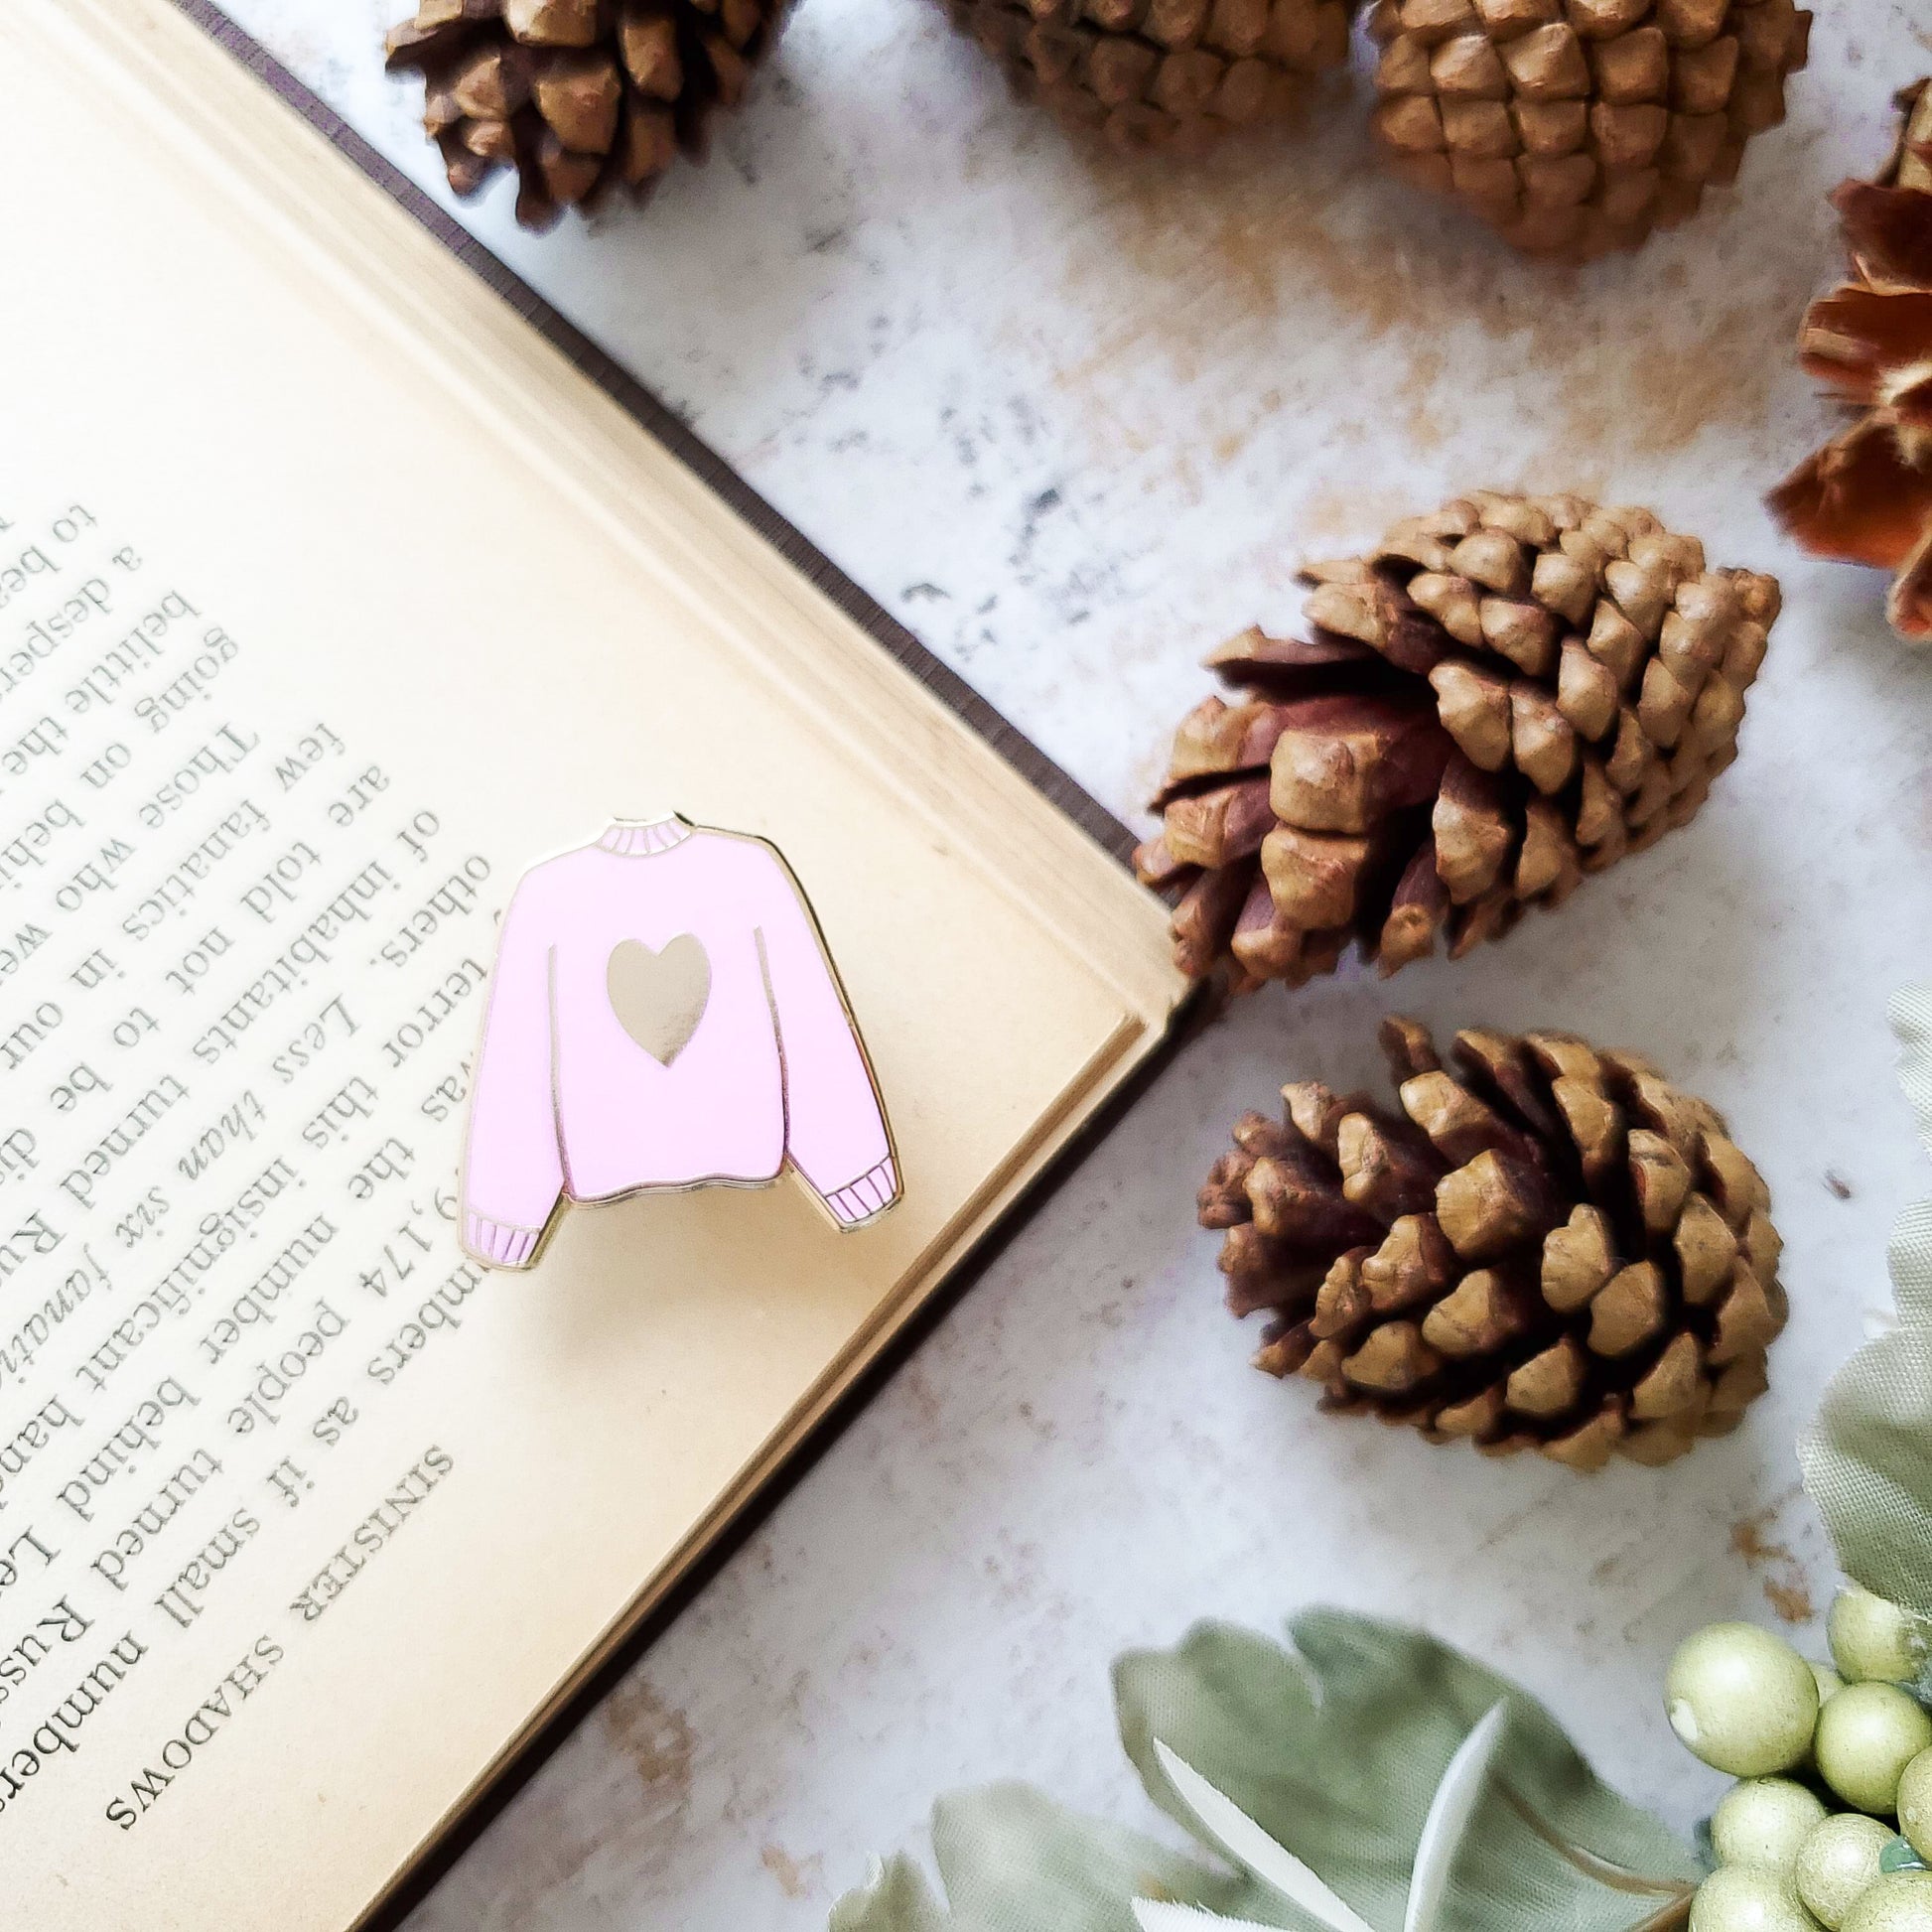 Pink hand stamped heart sweater enamel pin with a book and pine cones